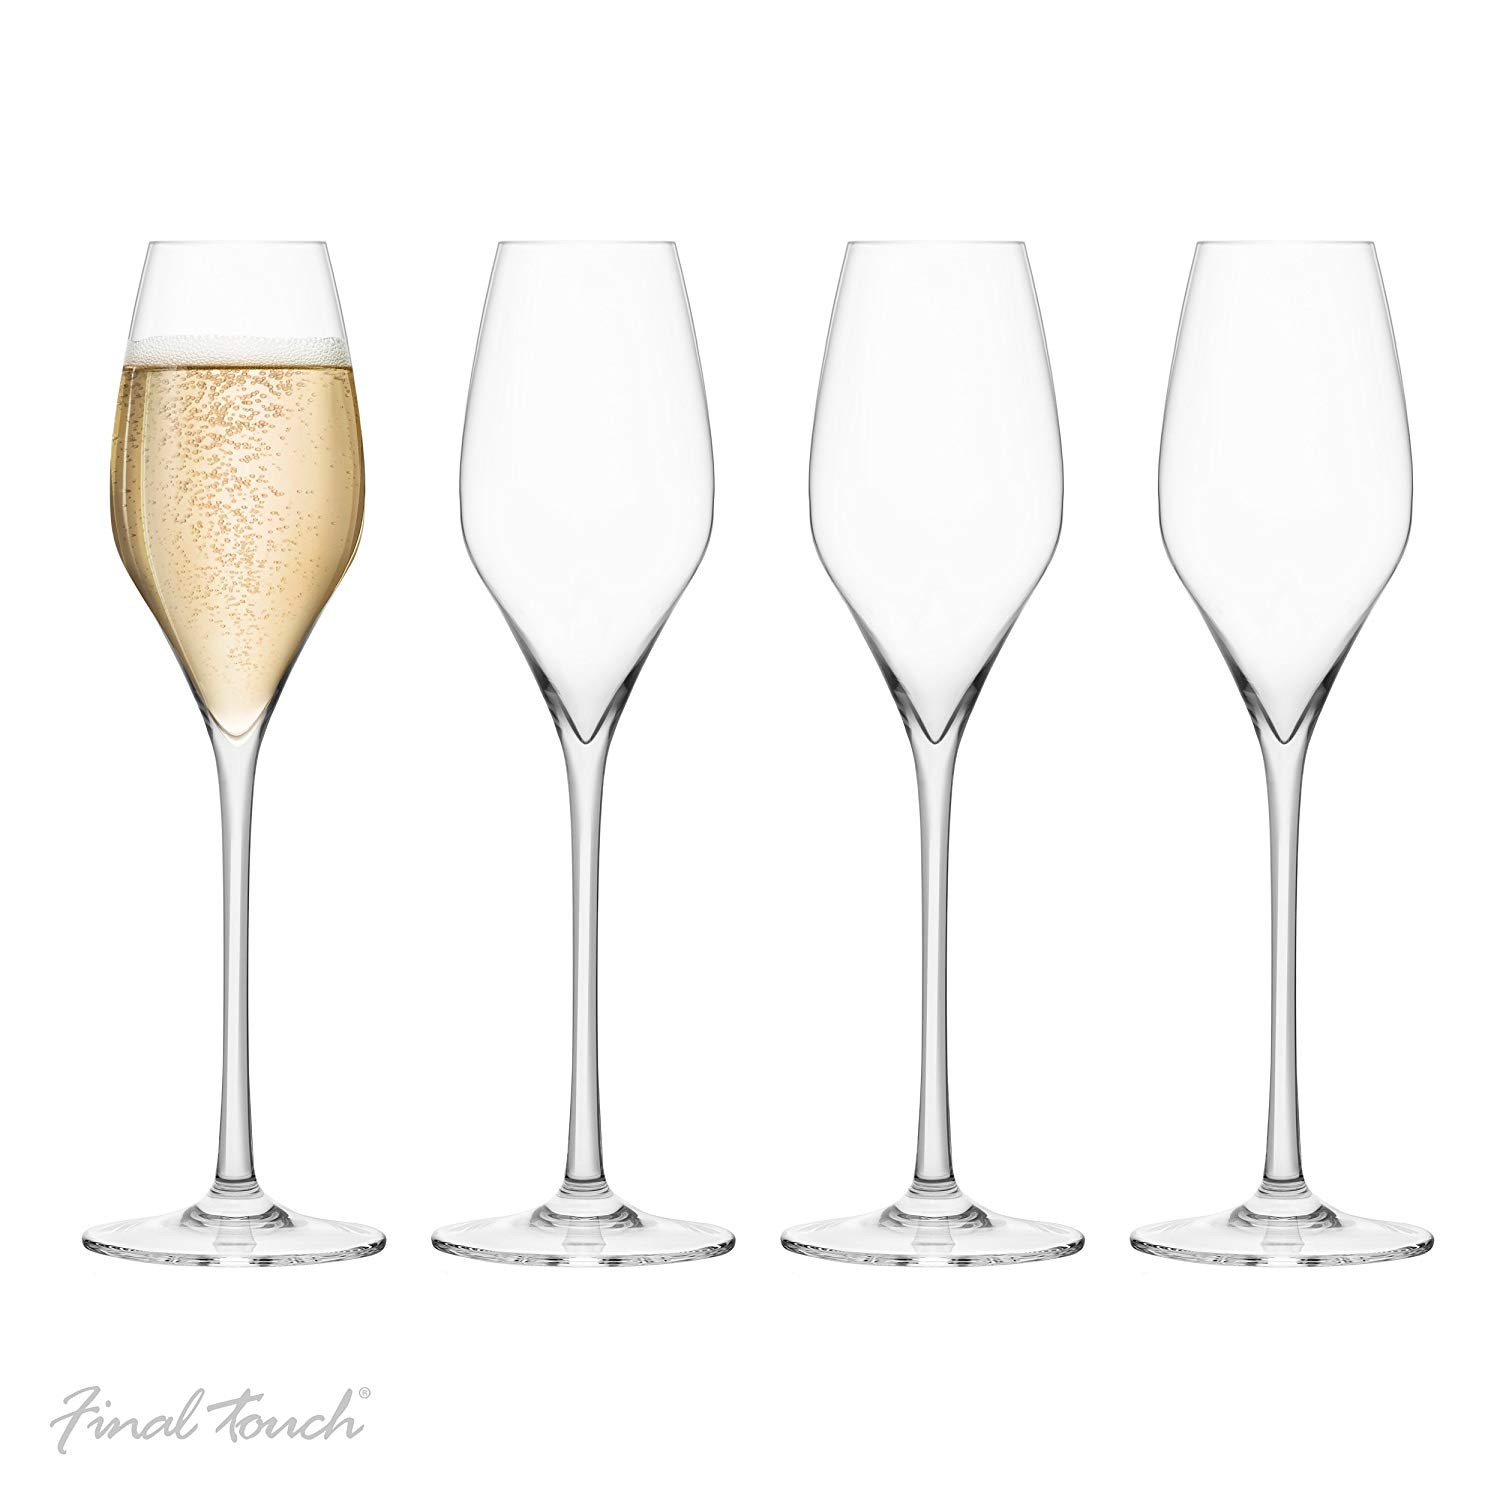 12 attractive Old Waterford Crystal Vase 2024 free download old waterford crystal vase of final touch crystal wine champagne flutes 4x vintage flute dinner within final touch crystal wine champagne flutes 4x vintage flute dinner glasses set uk